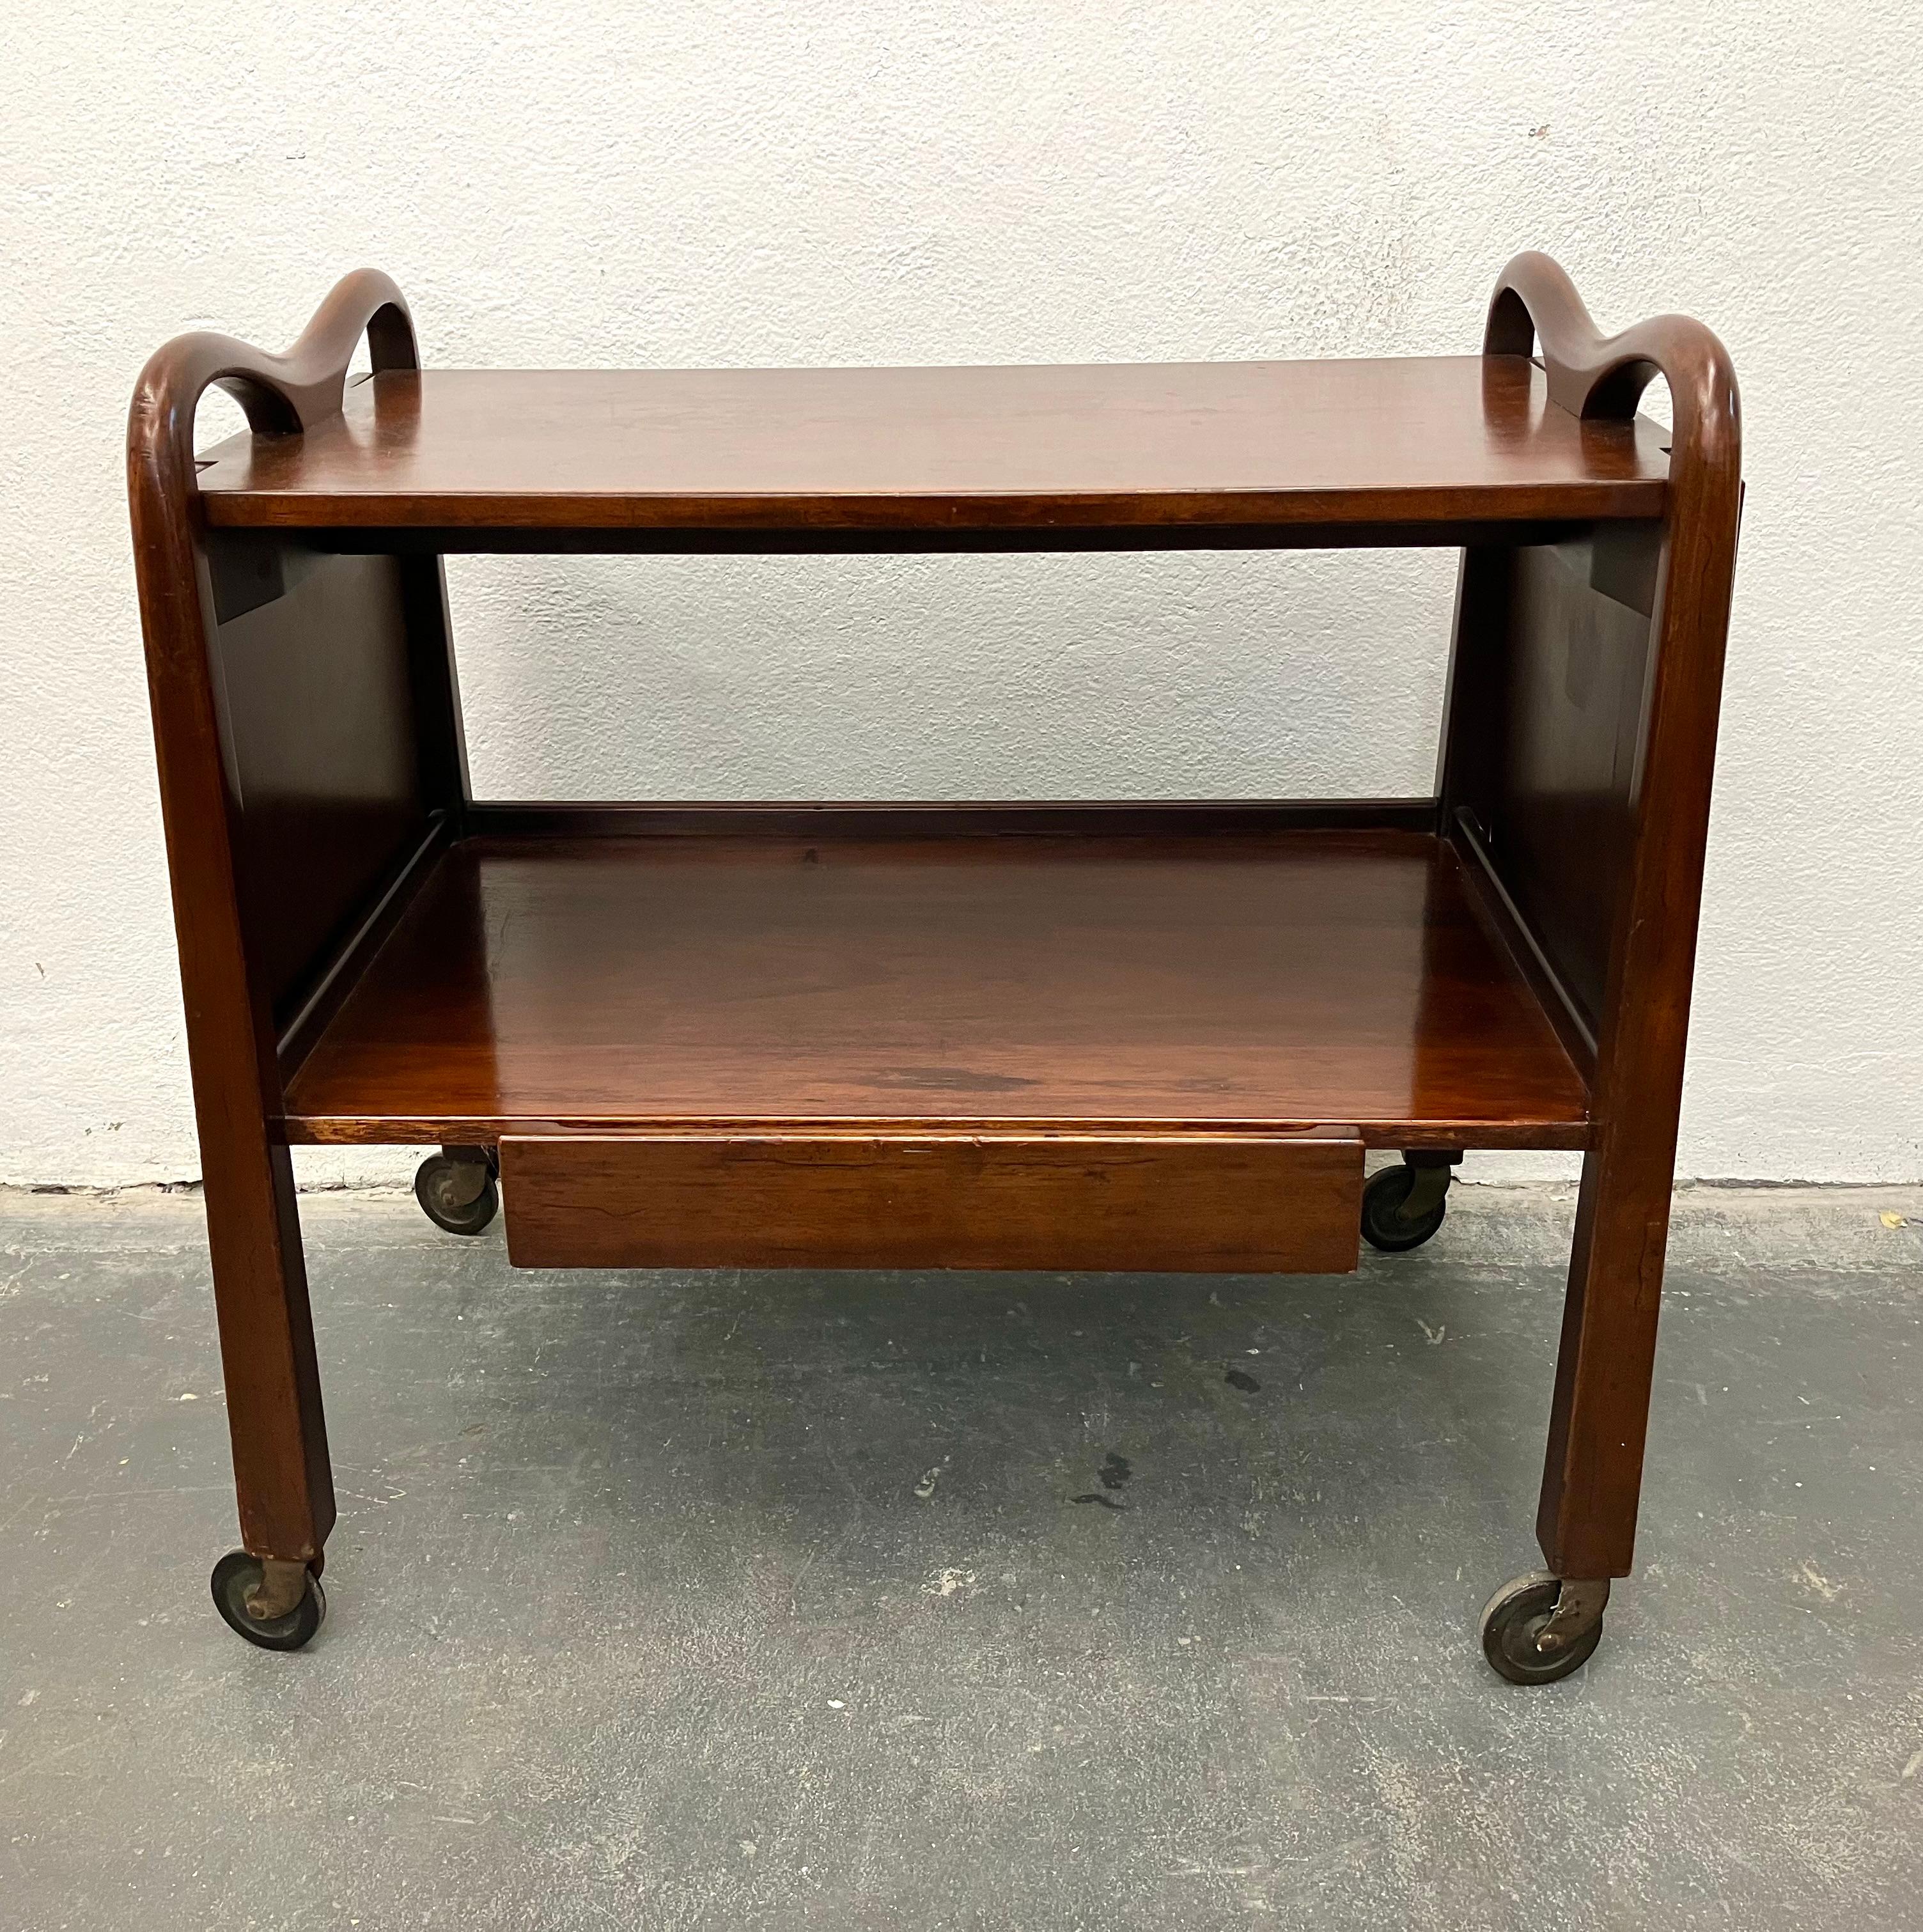 Cuban mahogany rolling bar cart with inverse tapered legs, carved handles, one drawer, and two drop-leaf extensions. Designed by American designer Edmund J. Spence in a stylized Mexican Modern pastiche, and made in Mexico by Industria Meublera.